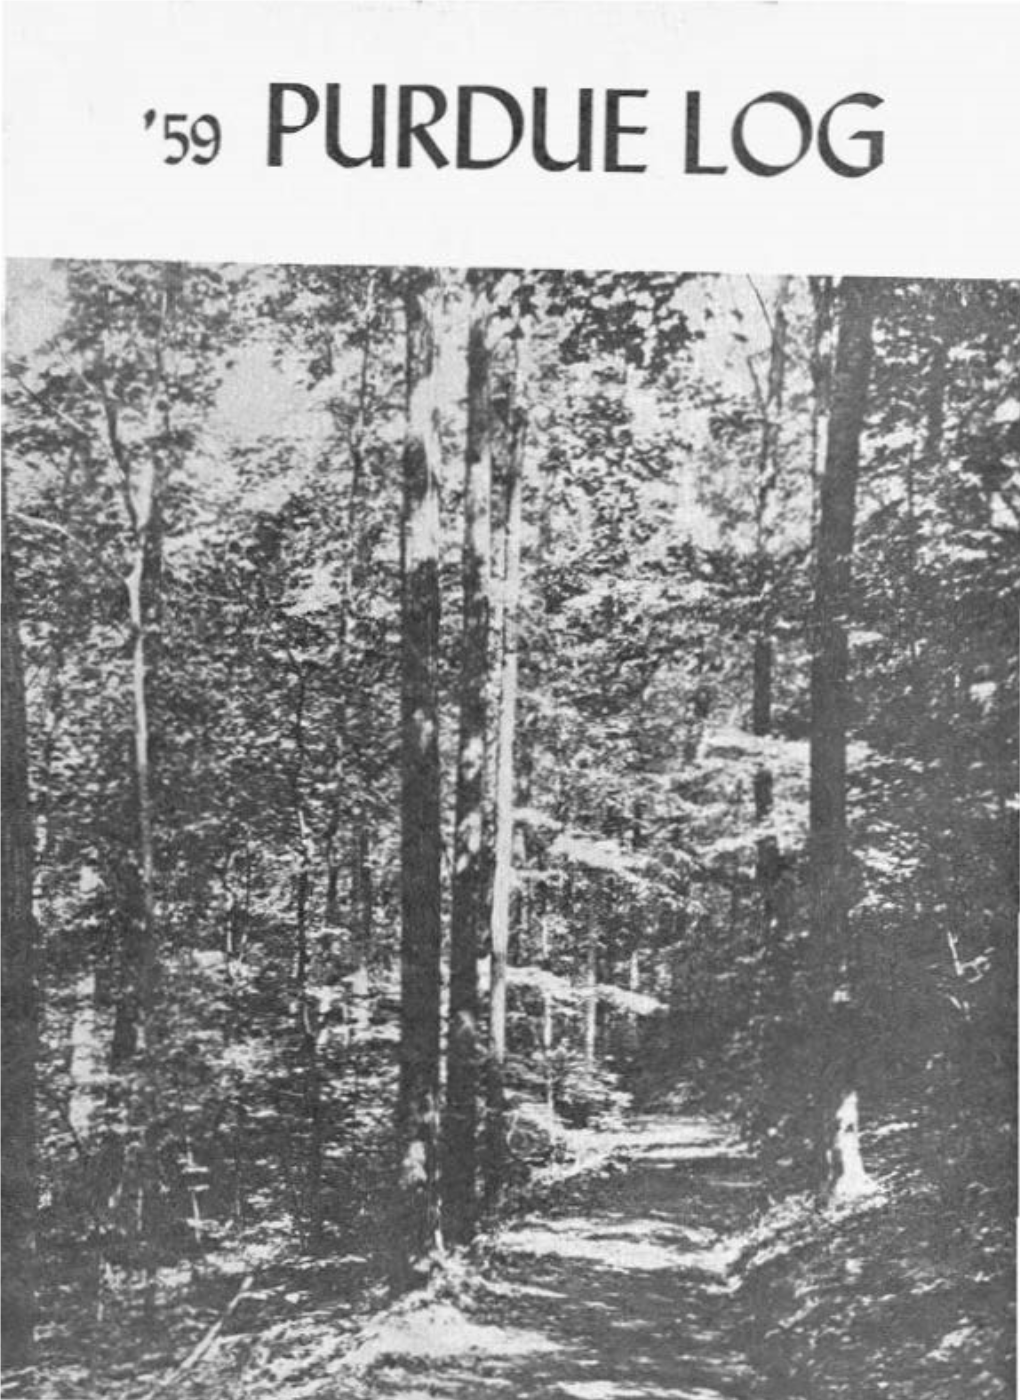 '59 PURDUE Log 1959 Purdue Log First Annual Publication of Forestry Cluh Department of Forestry & Conservation Purdue Uni"Ersity